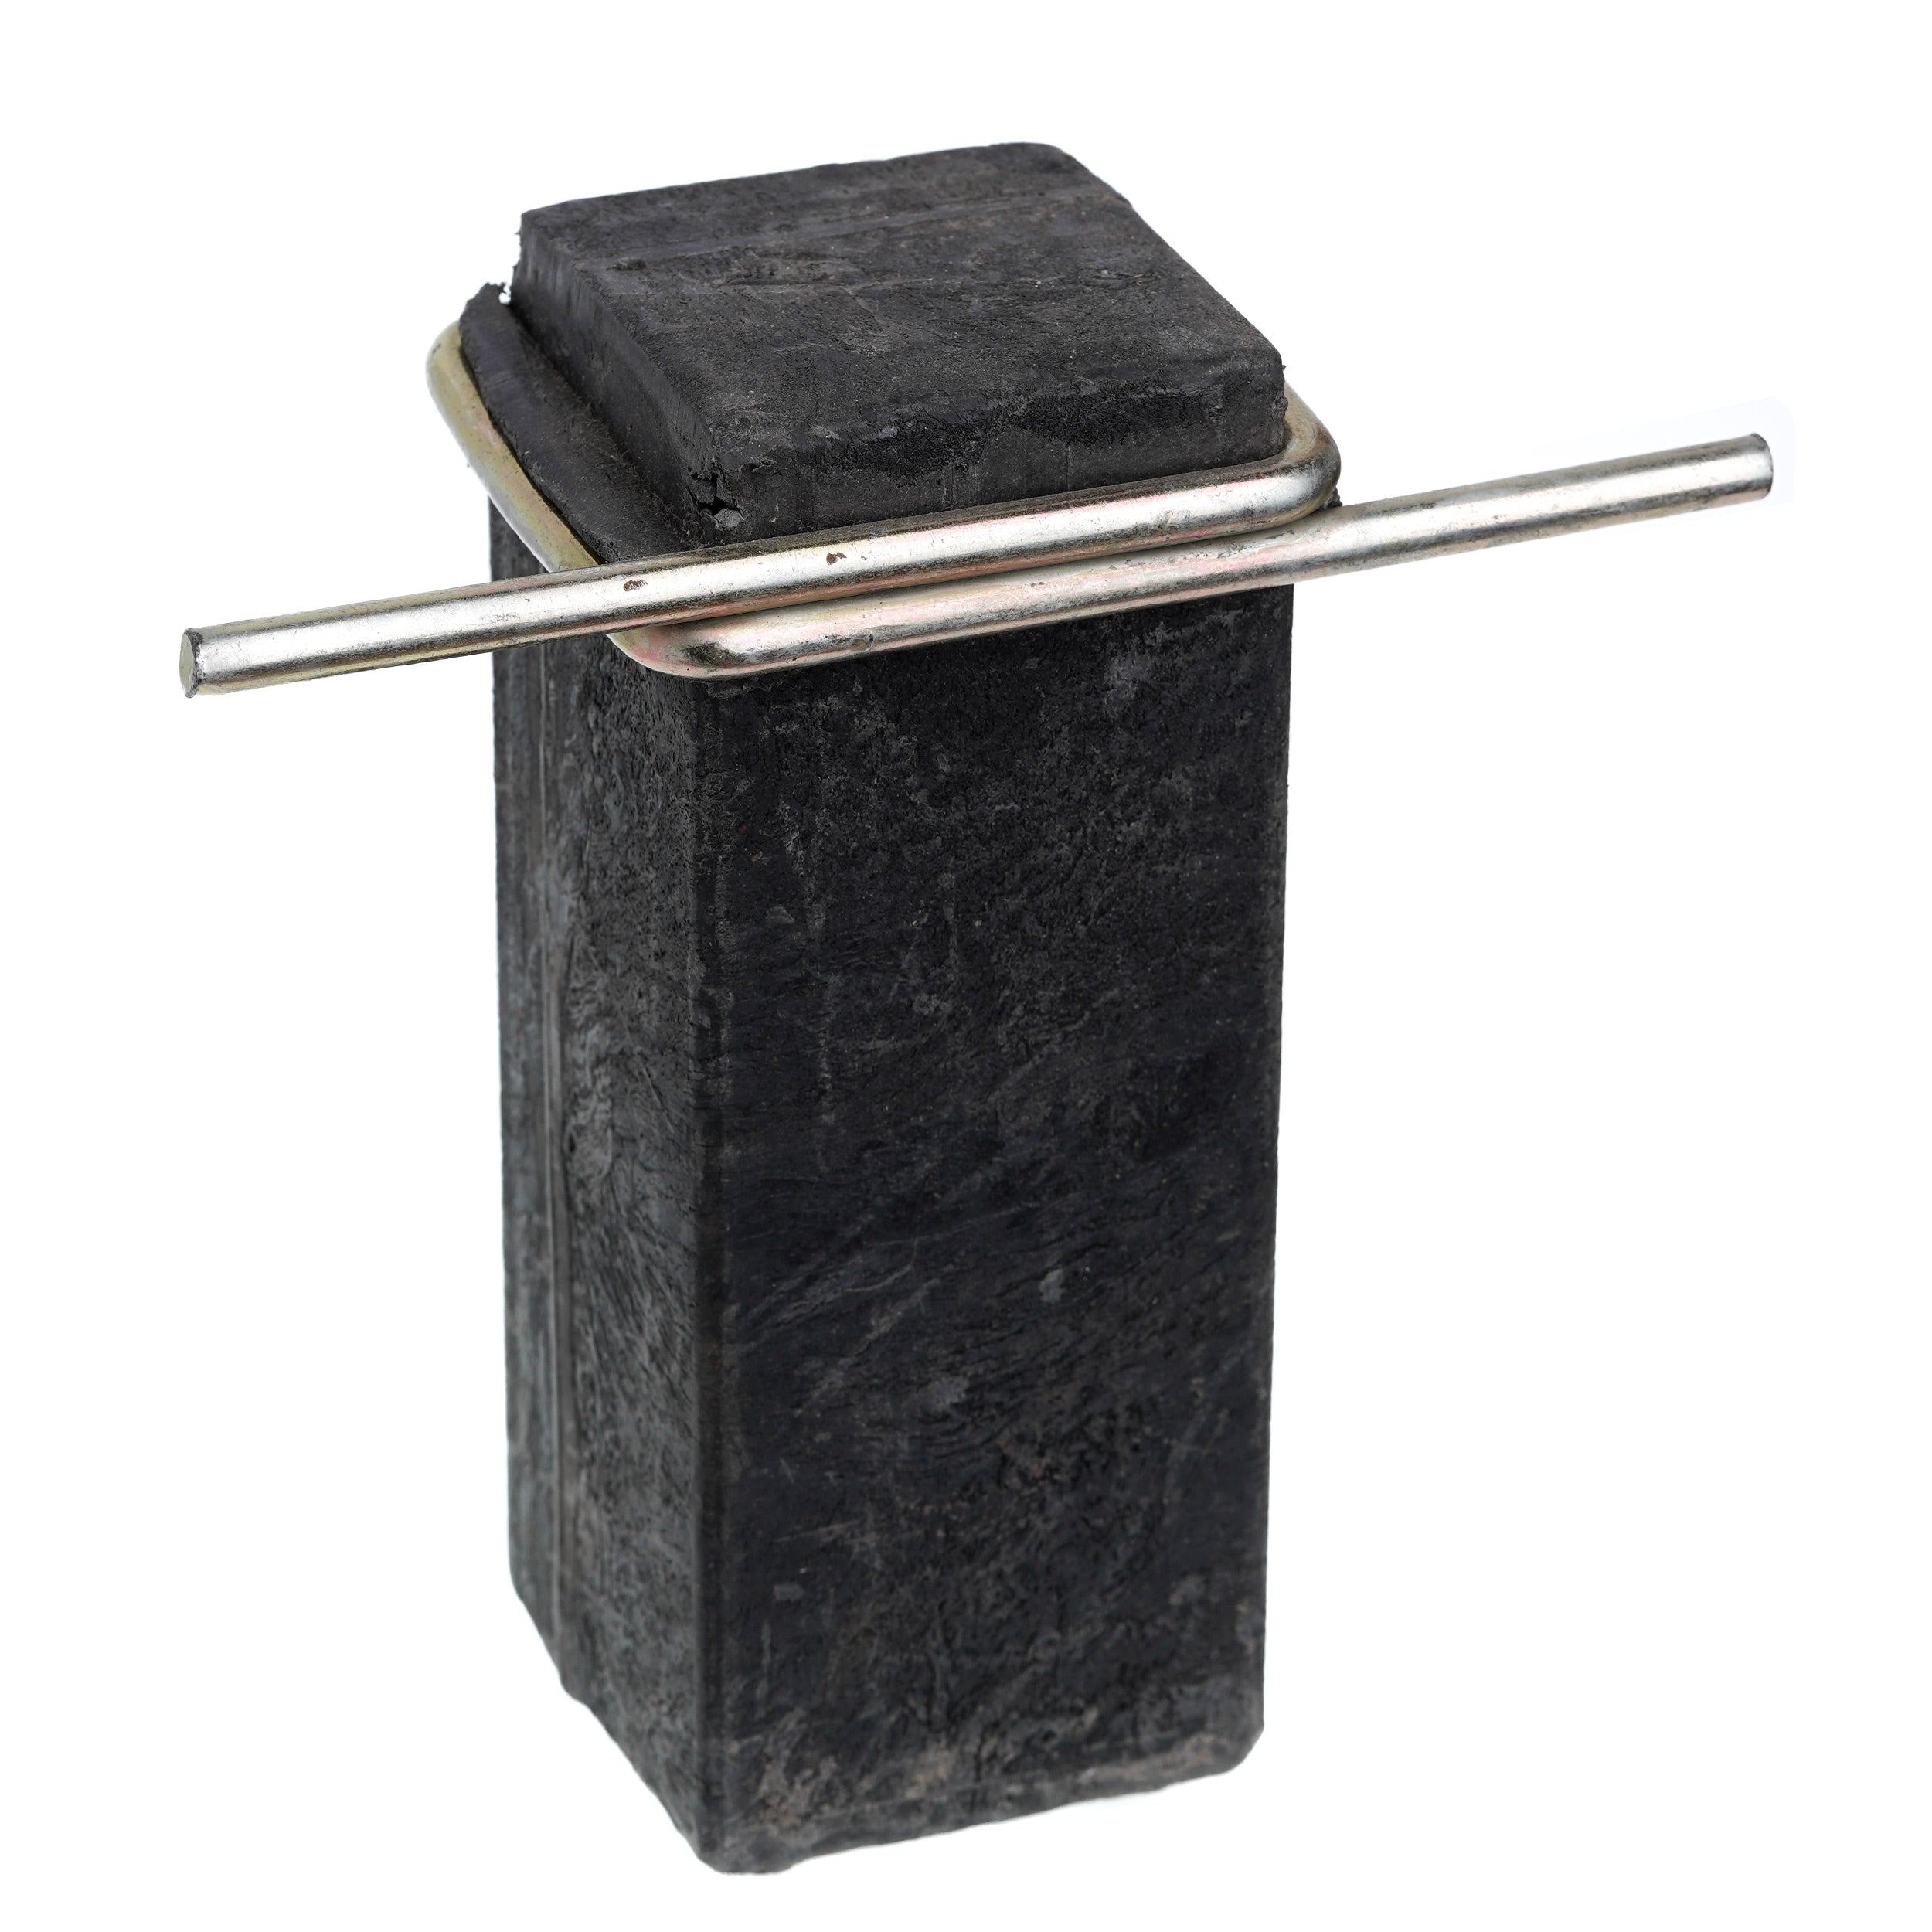 Image of Drive In Tool, black with metal wrapped around top